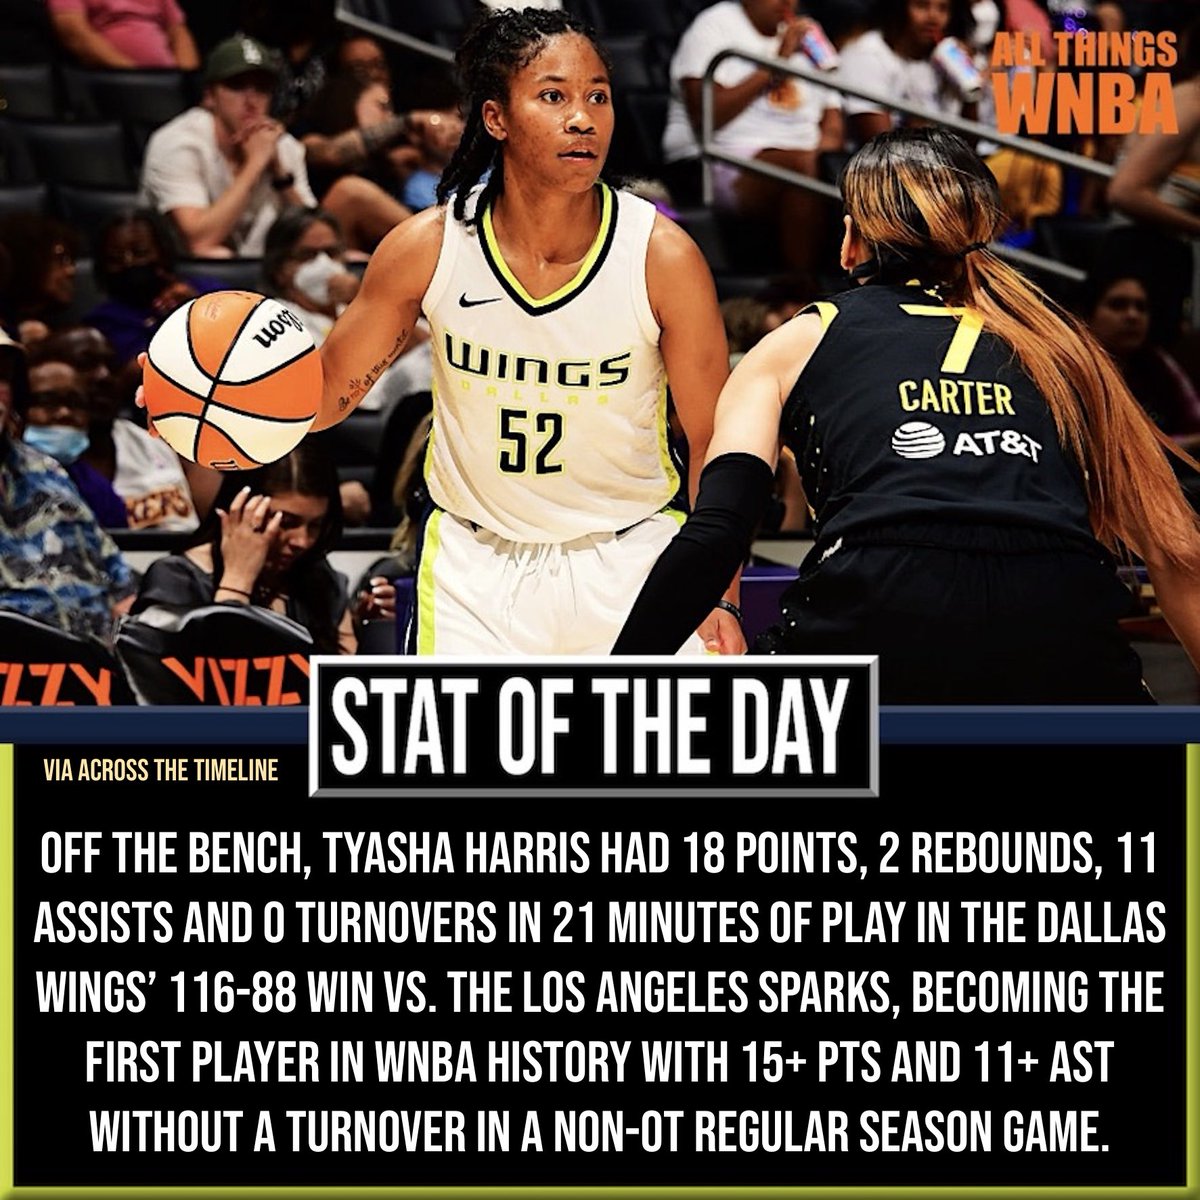 A career-high tying 18 points and a new career-high 11 assists. @TyHarris_52 was ballin en route to her first career double-double 💪🏽 #WNBA #DallasWings #AllForTexas